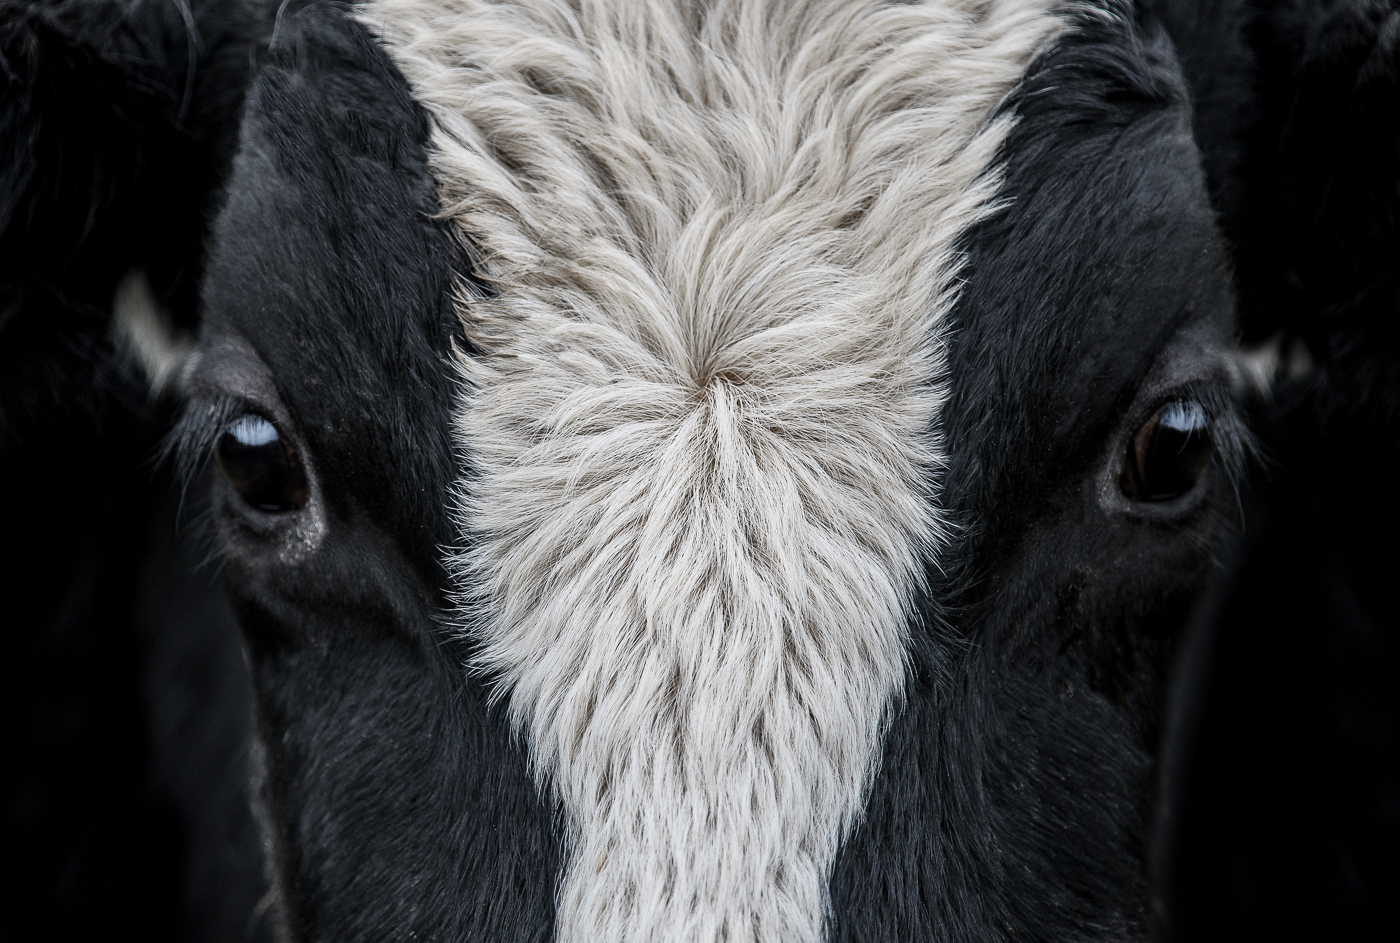 Close up of black and white cow's face